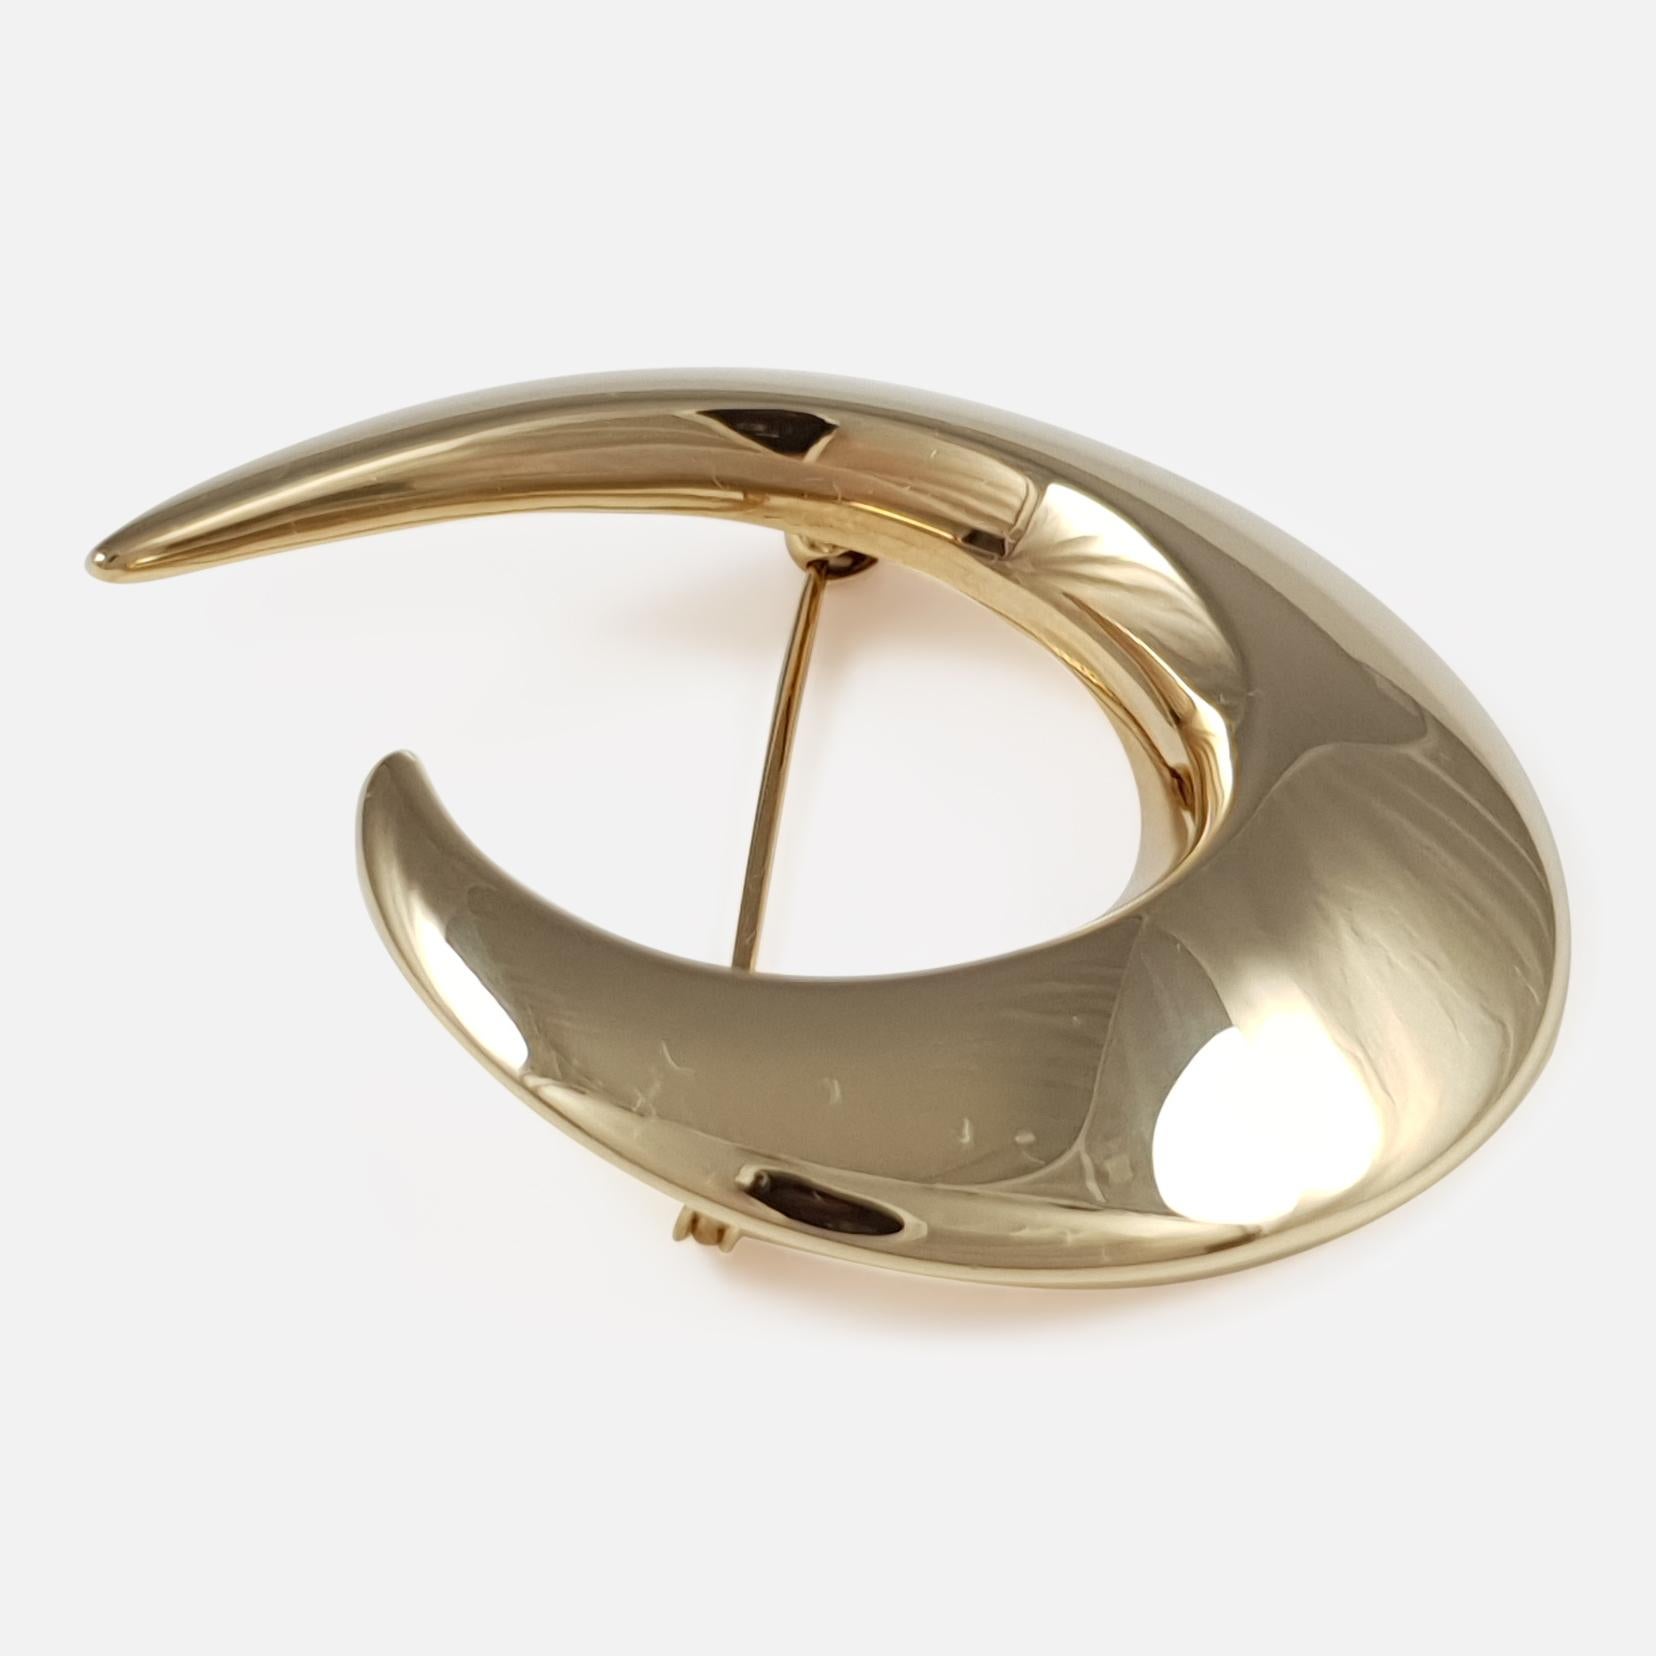 A Danish 14 karat yellow gold crescent brooch, by Hans Hansen. The brooch is stamped with the facsimile signature of 'Hans Hansen', '585', & 'Denmark'. The brooch is UK hallmarked, stamped '585' to denote 14 karat (carat) gold.

The brooch measures